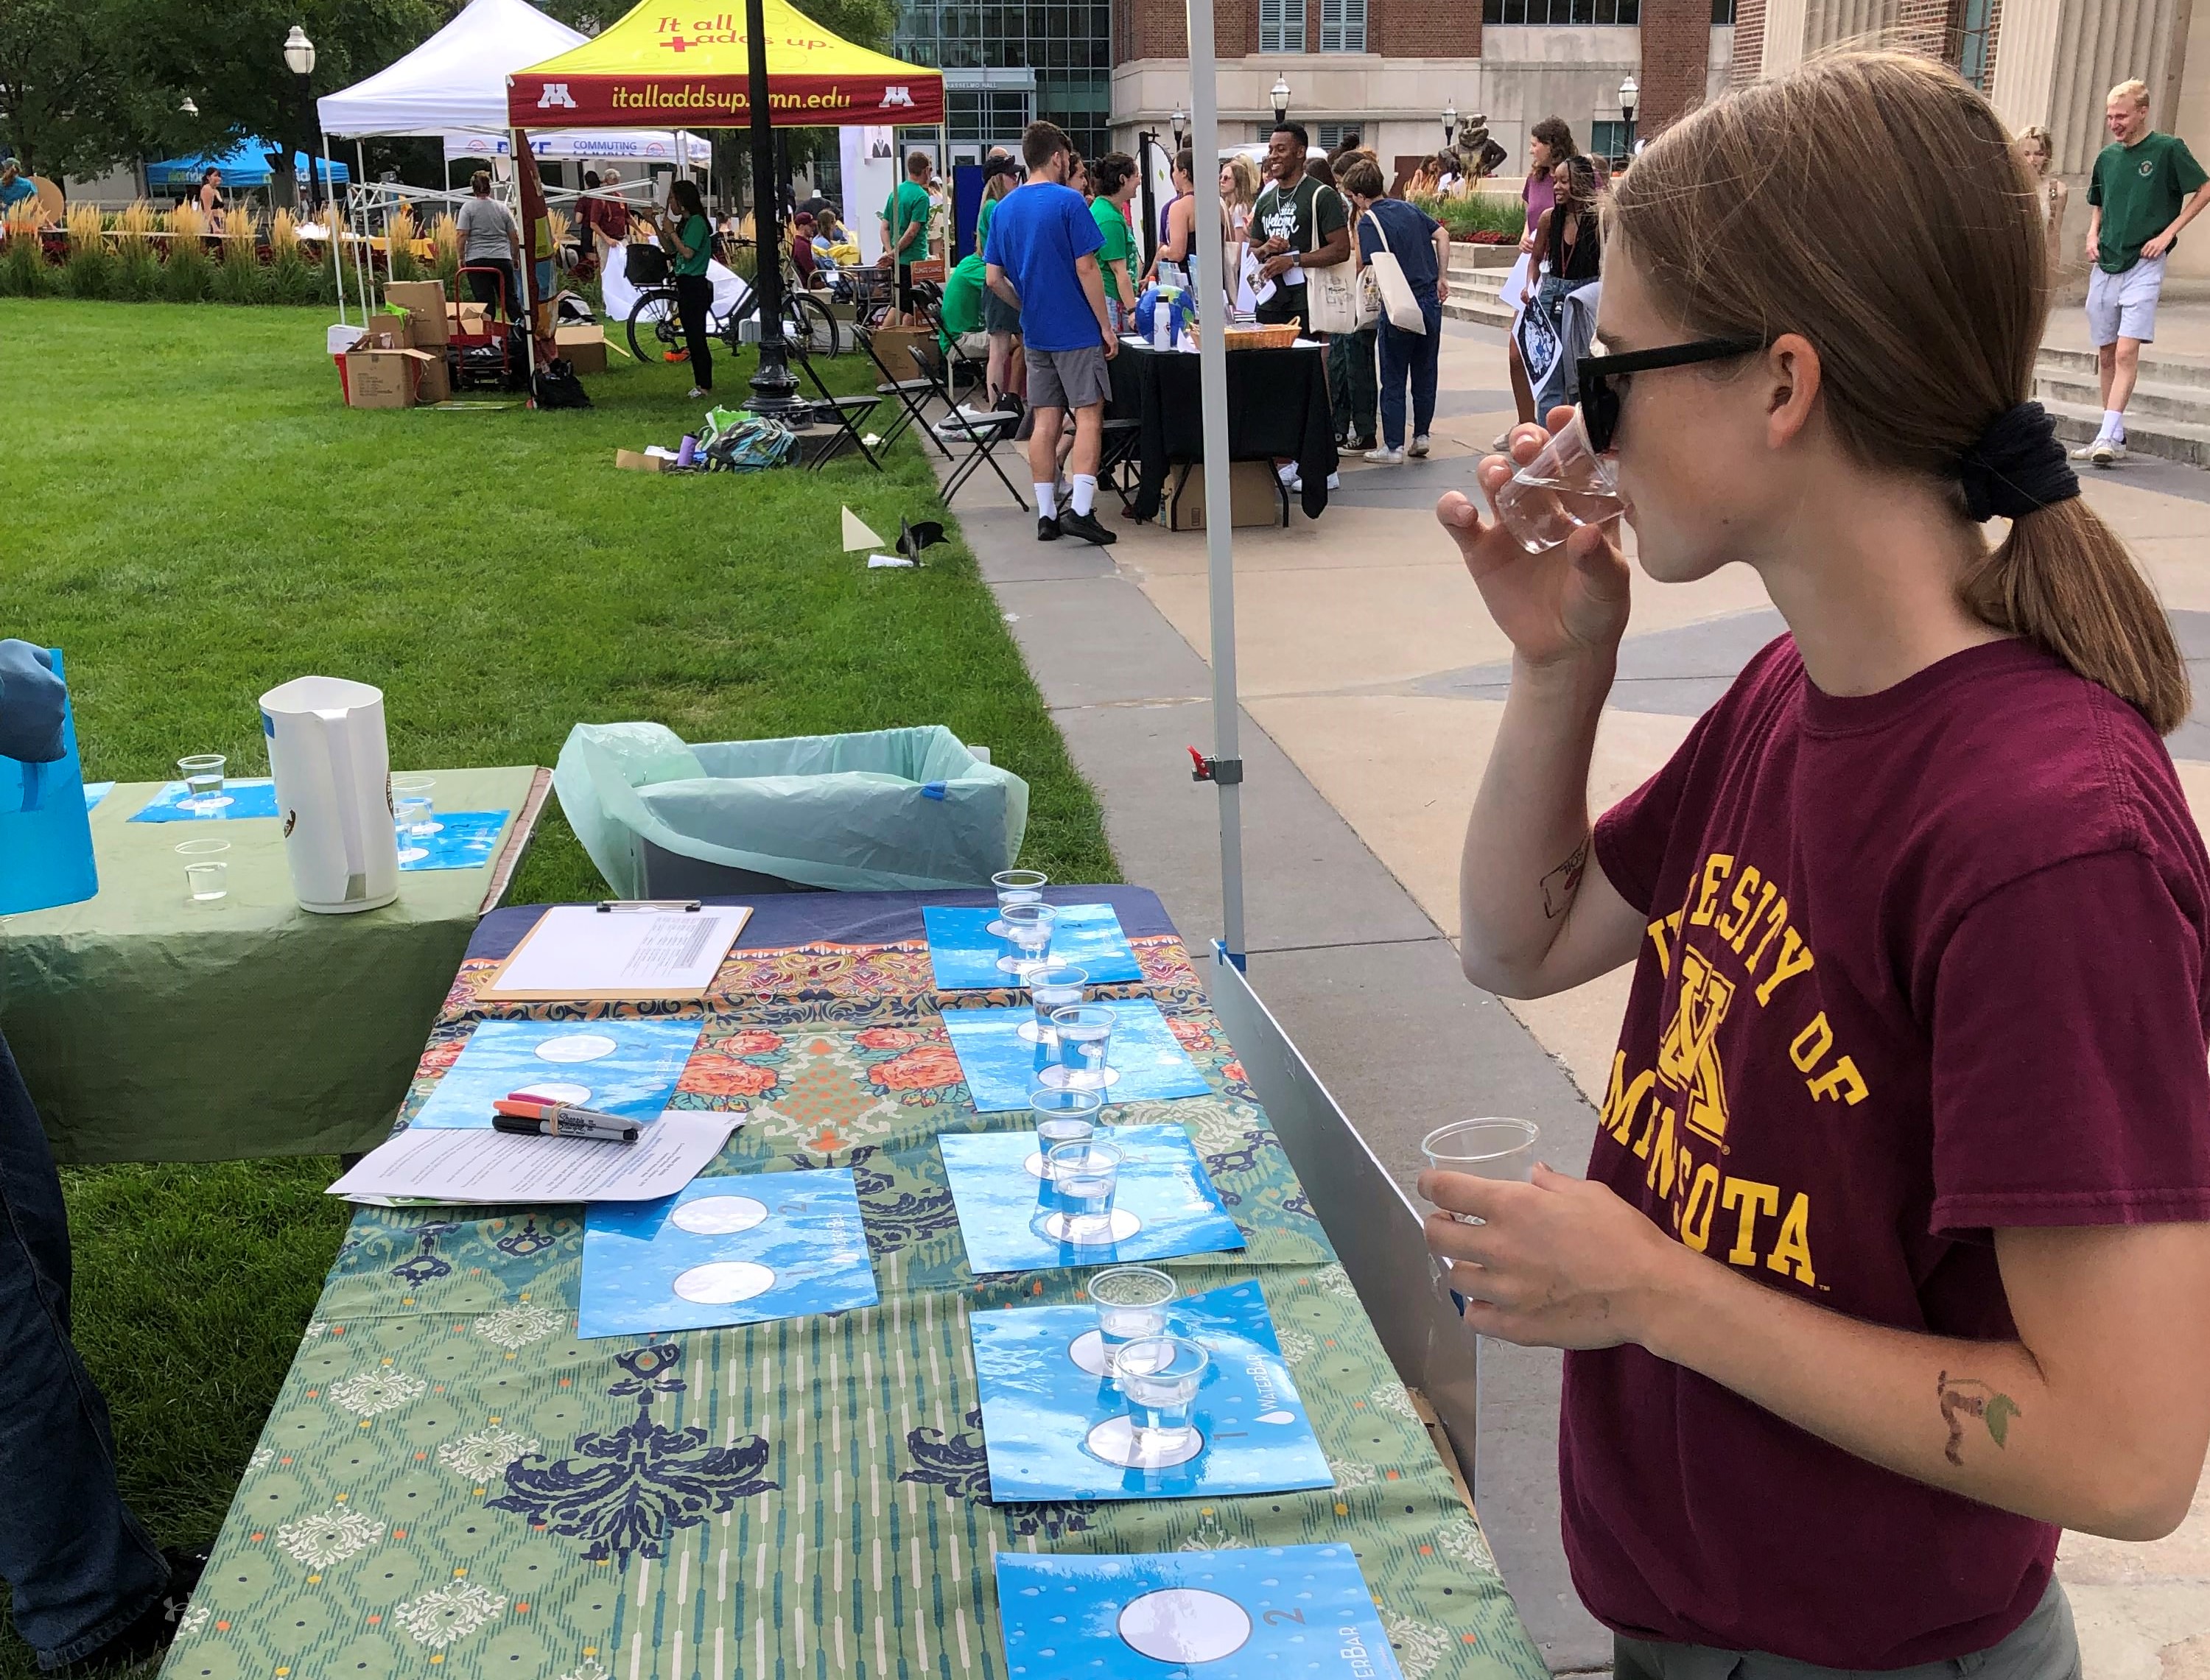 A photo of graduate student Bailey Tangen sipping two glasses of water at a student event called "The Water Bar"